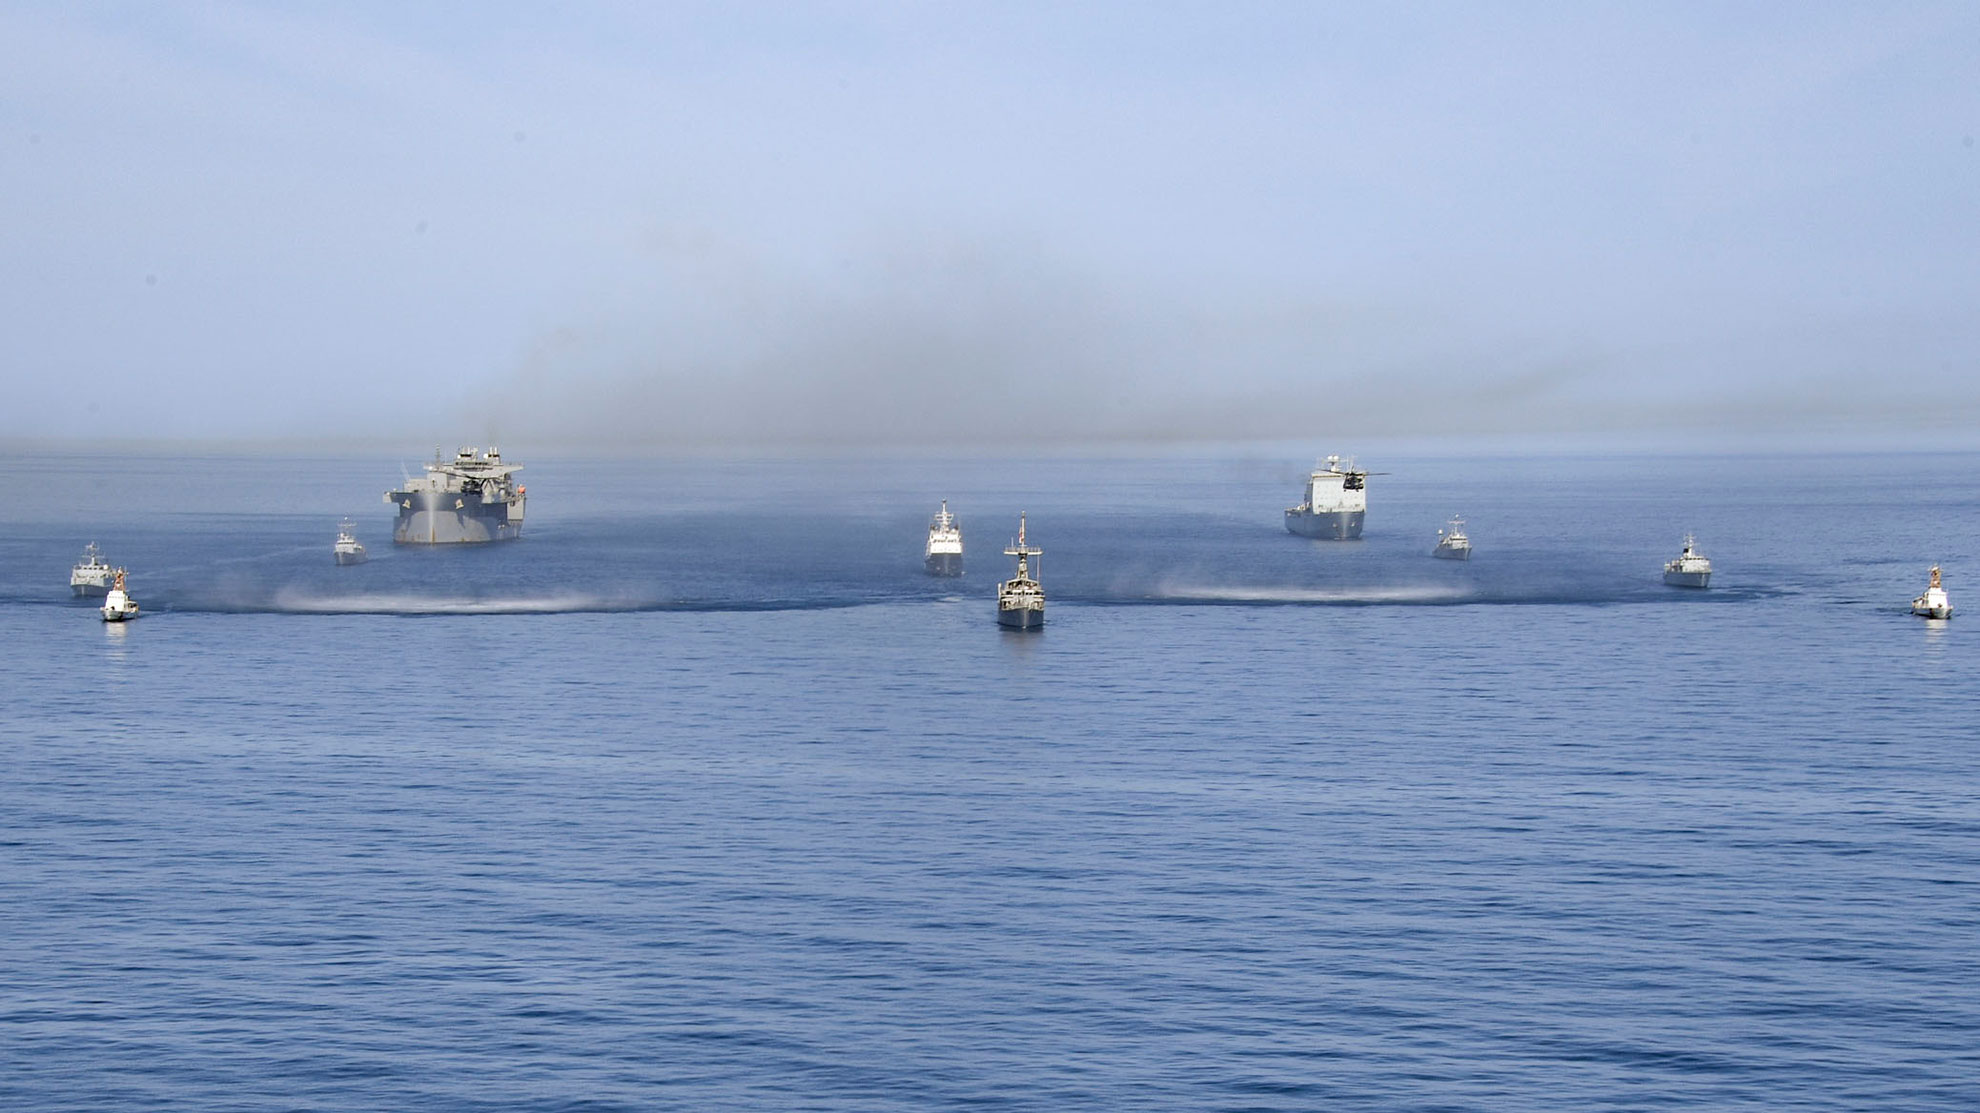 Arabian Gulf (April 10, 2019) The U.S. Navy expeditionary sea base USS Lewis B. Puller (ESB 3), fleet ocean tug USNS Catawba (T-ATF 168), Avenger-class mine countermeasures ship USS Sentry (MCM 3), U.S. Coast Guard Island-class coastal patrol boats USCGC Maui (WPB 1304) and USCGC Wrangell (WPB 1332); the United Kingdom Royal Navy's RFA Cardigan Bay (L3009); the French Marine Nationale's minehunters FS L'Aigle (M647) and FS Sagittaire (M650); the United Kingdom Royal Navy's minehunters HMS Shoreham (M112) and HMS Ledbury (M30); and Mine Countermeasures Squadron (HM-15) MH-53E Sea Dragon helicopters navigate the Arabian Gulf in formation during Artemis Trident 19. Artemis Trident is a mine countermeasures exercise conducted by France's Marine Nationale, the United Kingdom's Royal Navy and the U.S. Navy in the Arabian Gulf focused on increasing interoperability and demonstrating the nations' shared commitment to ensuring unfettered maritime operations -- U.S. Navy photo by MCS 2nd Class -